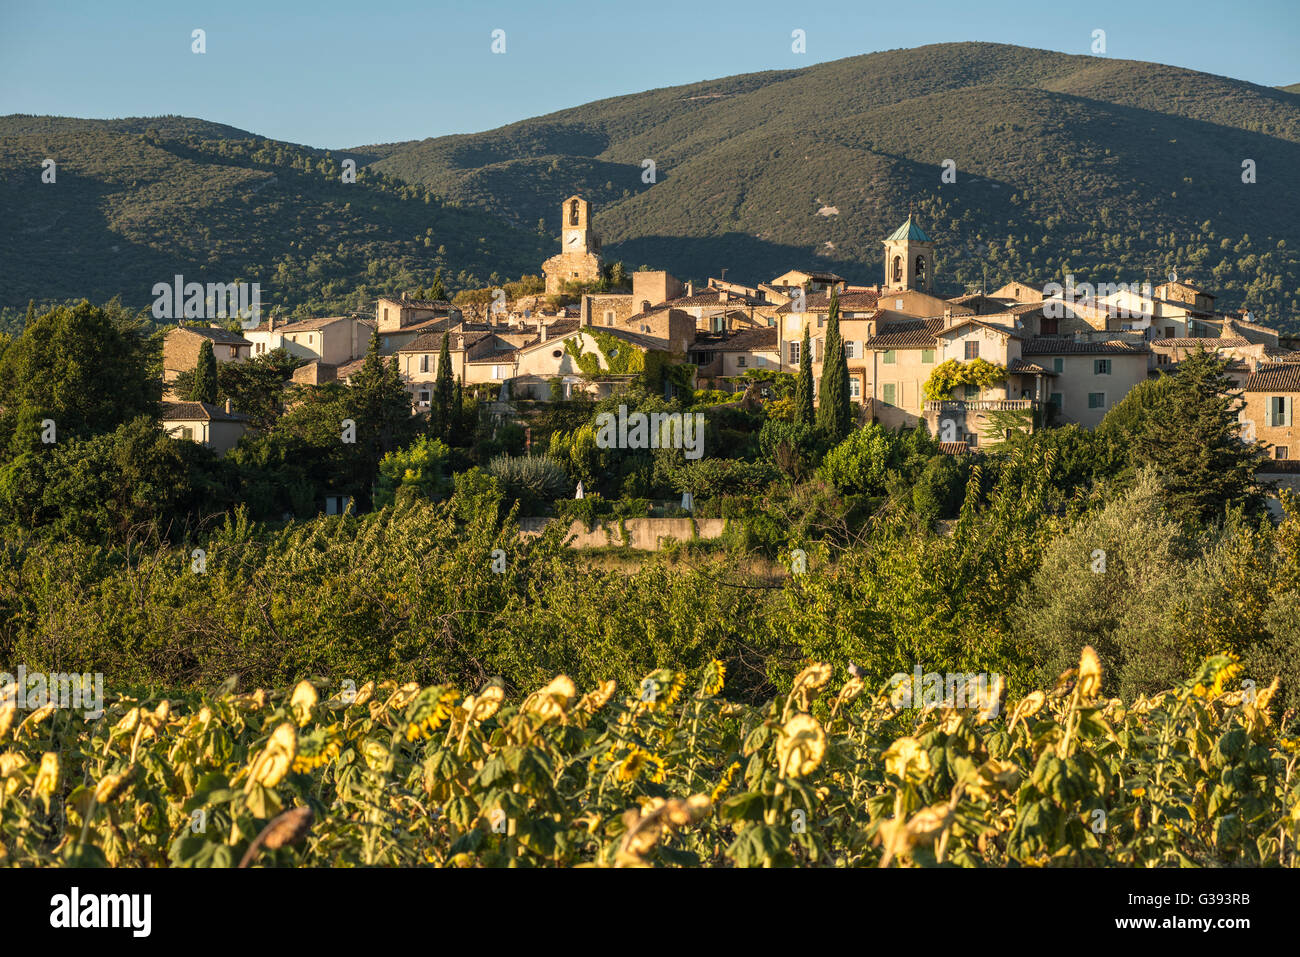 Village of Lourmarin, Luberon, Vaucluse, Provence-Alpes-Côte d'Azur (listed as one of the most beautiful villages in France) Stock Photo